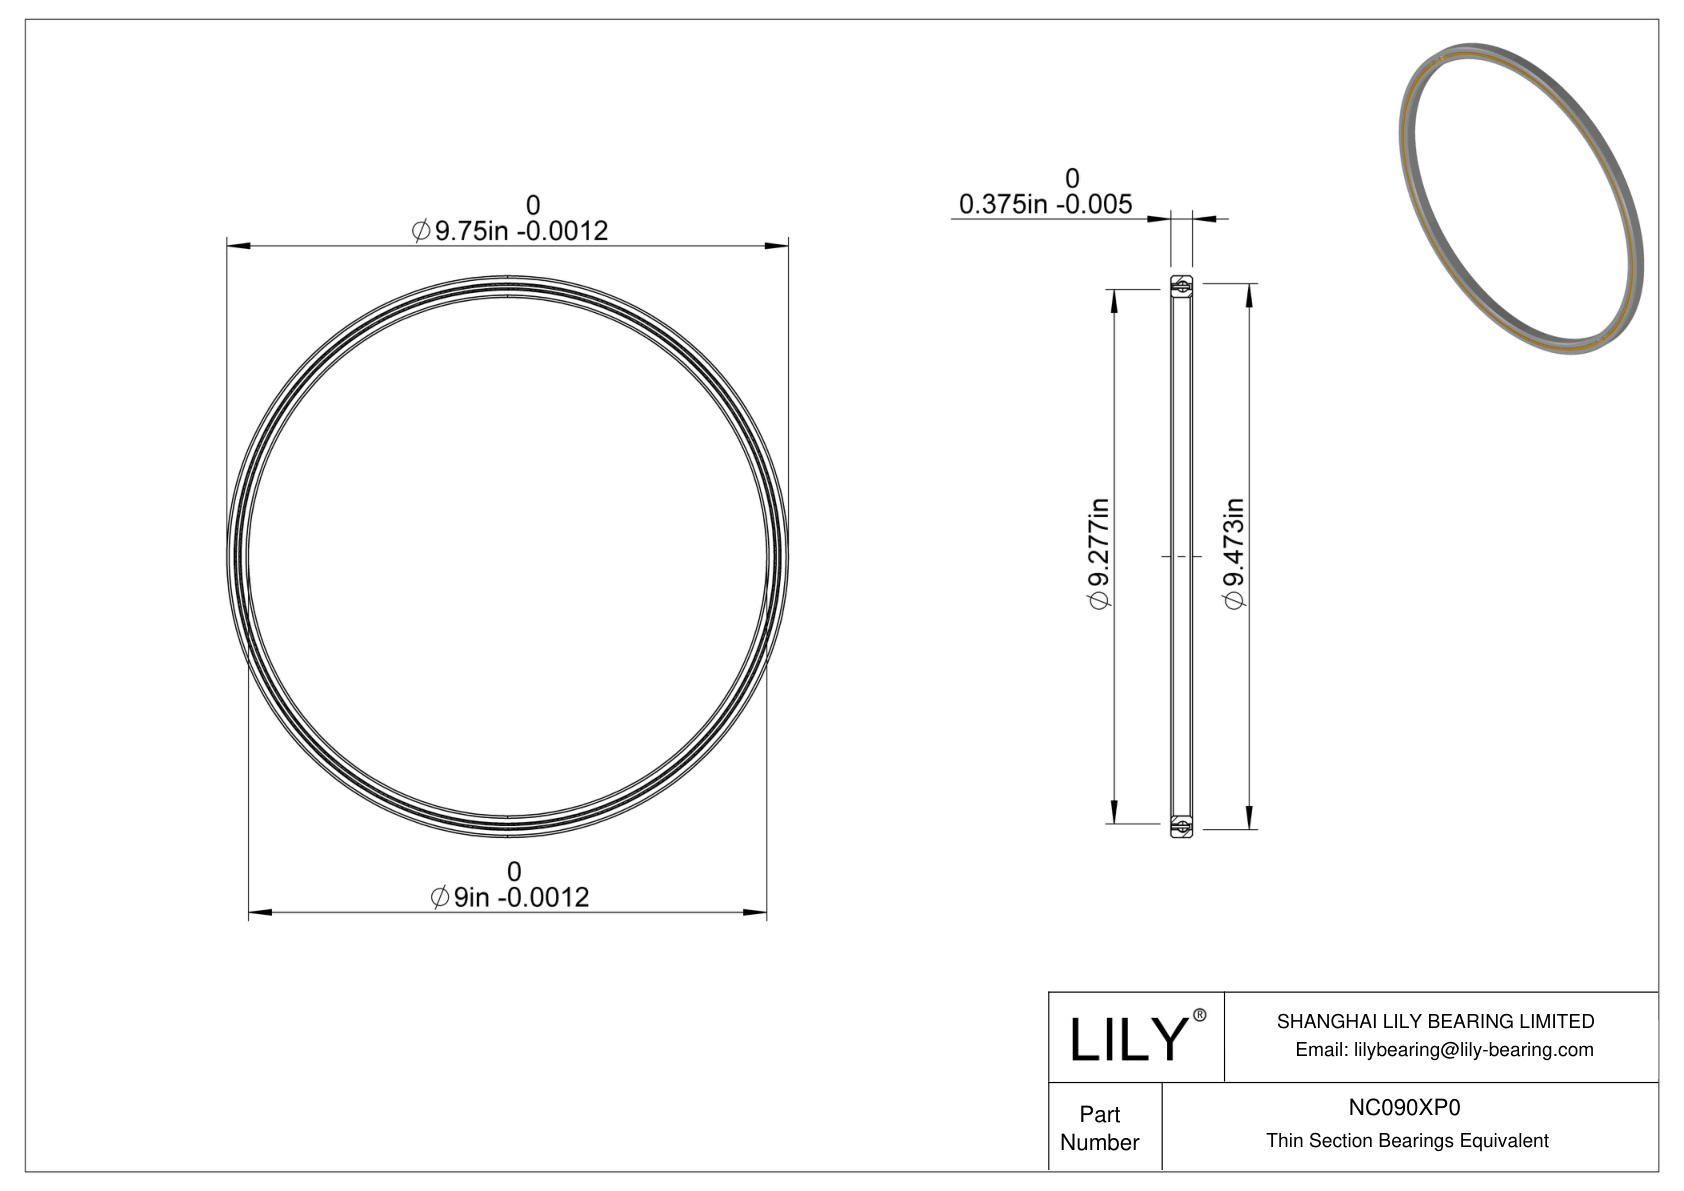 NC090XP0 Constant Section (CS) Bearings cad drawing